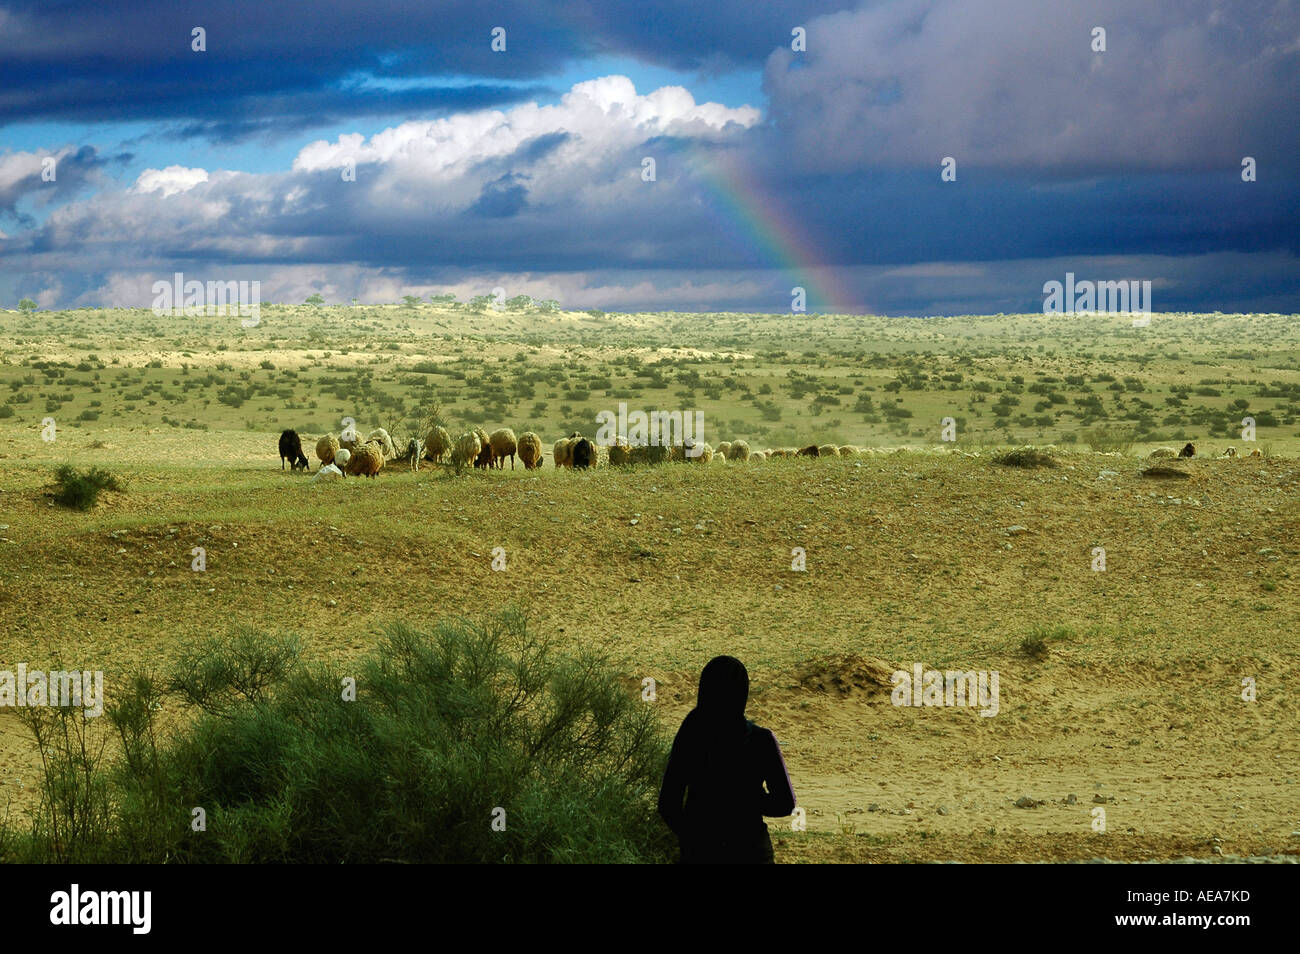 Sheep and female shepherd in the field on a stormy day with a rainbow in the background Stock Photo